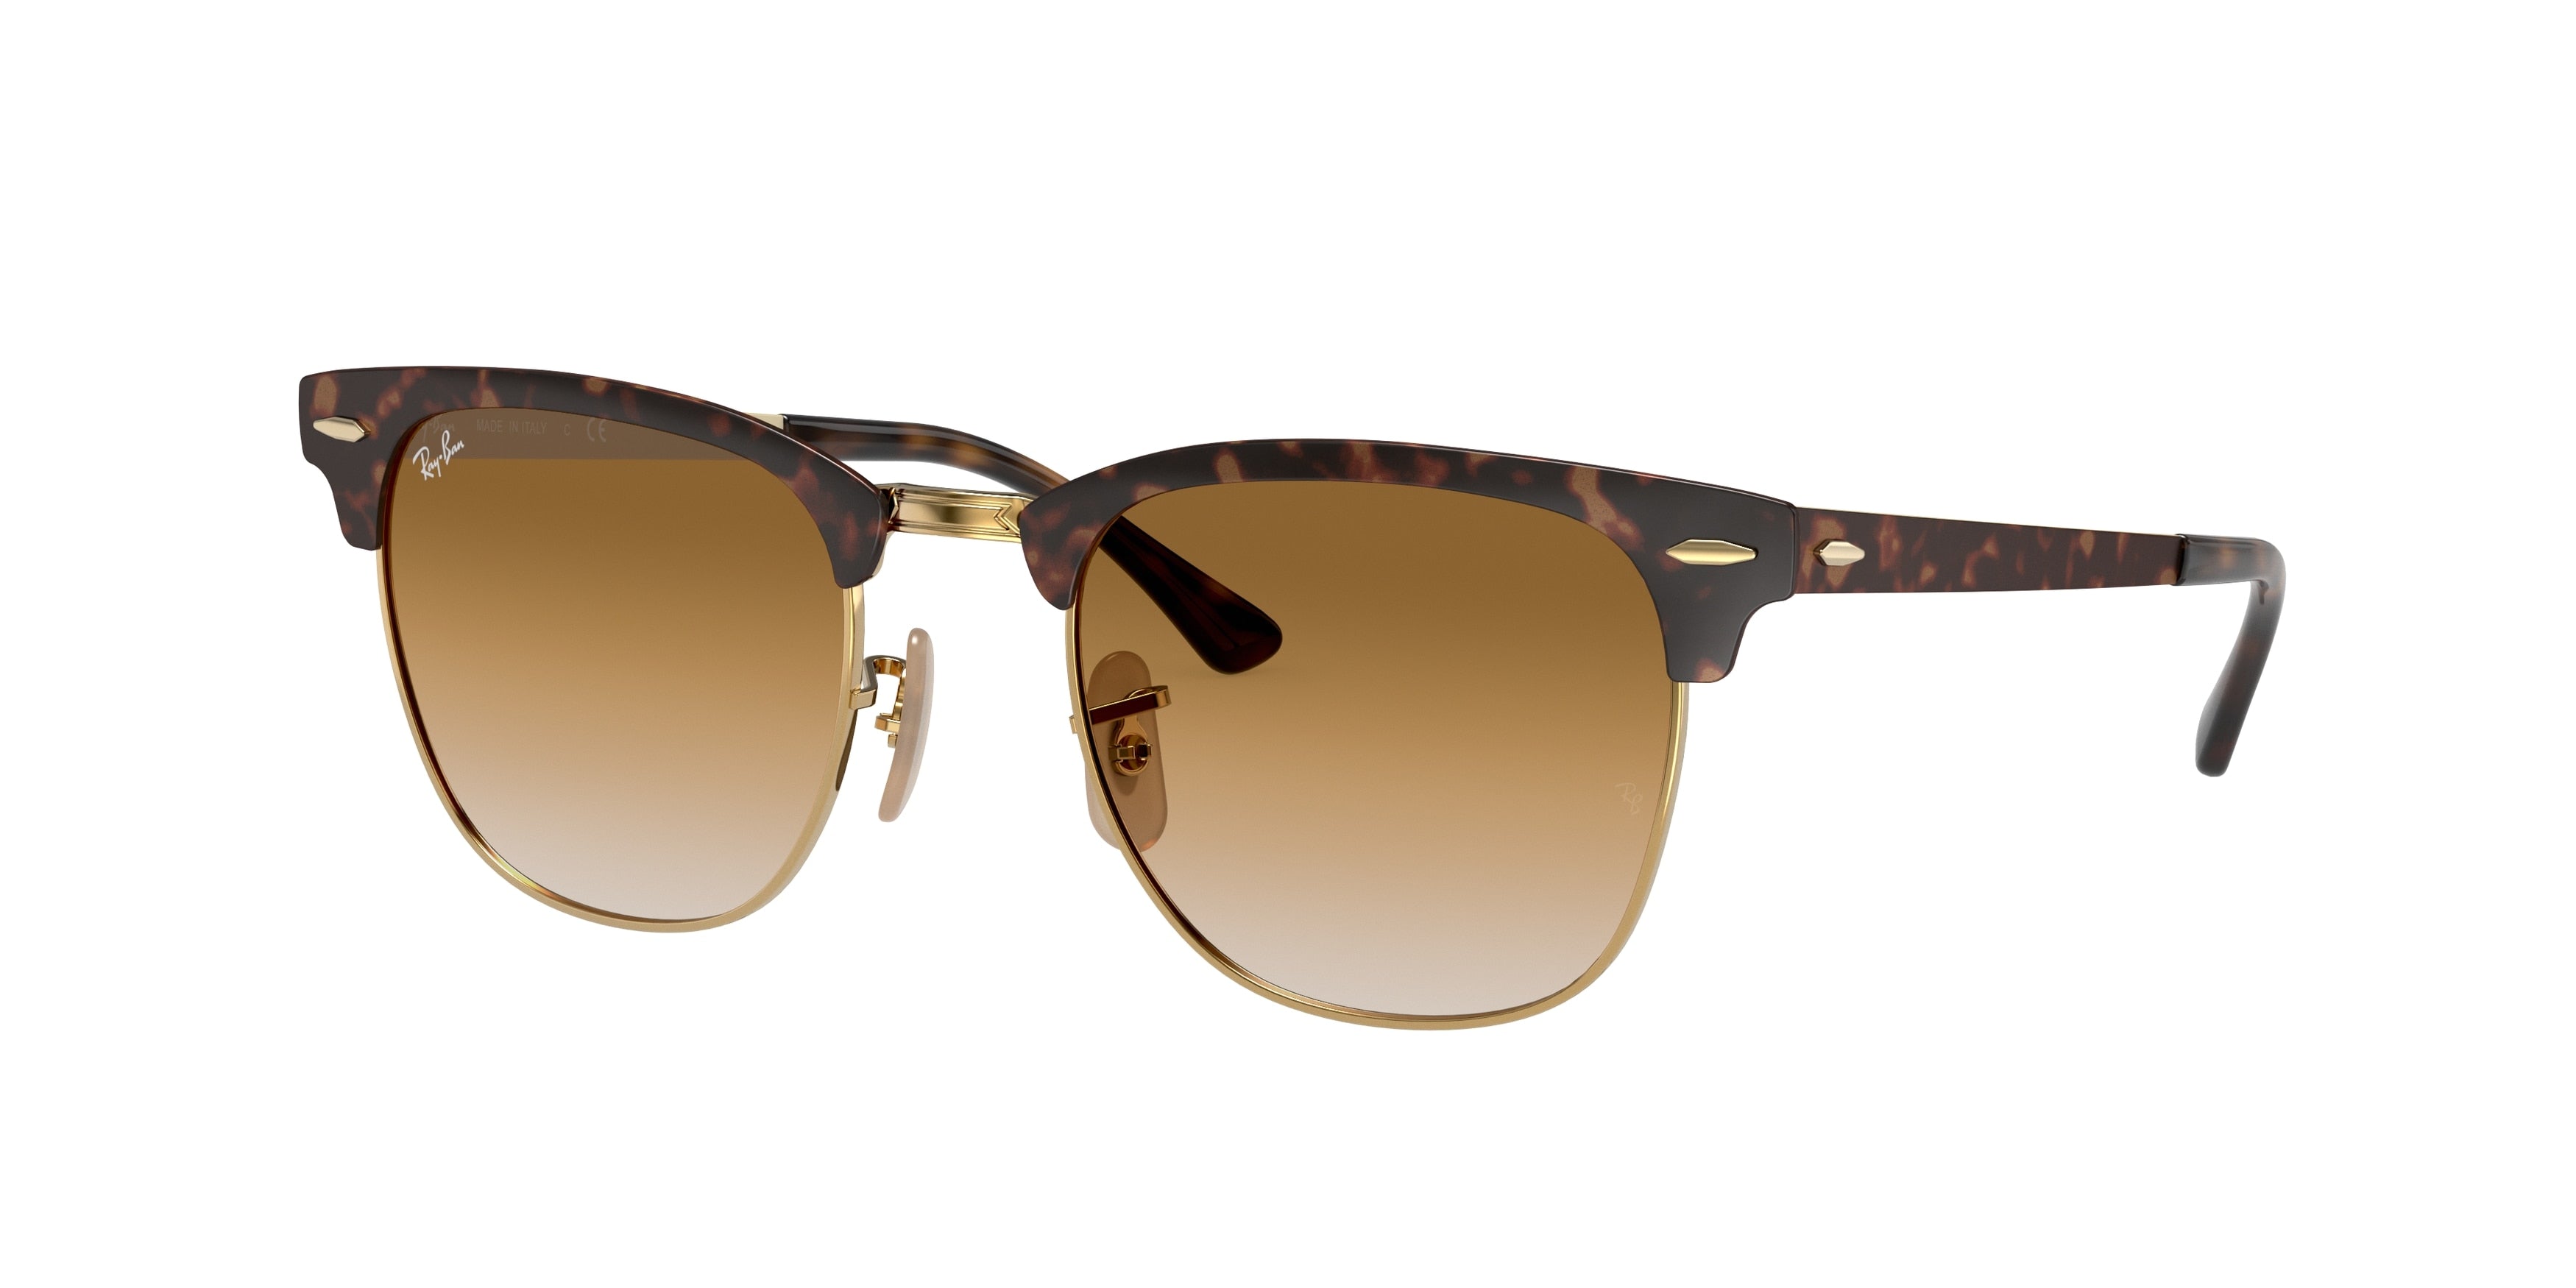 Ray-Ban CLUBMASTER METAL RB3716 Square Sunglasses  900851-Havana On Gold 50-145-21 - Color Map Tortoise